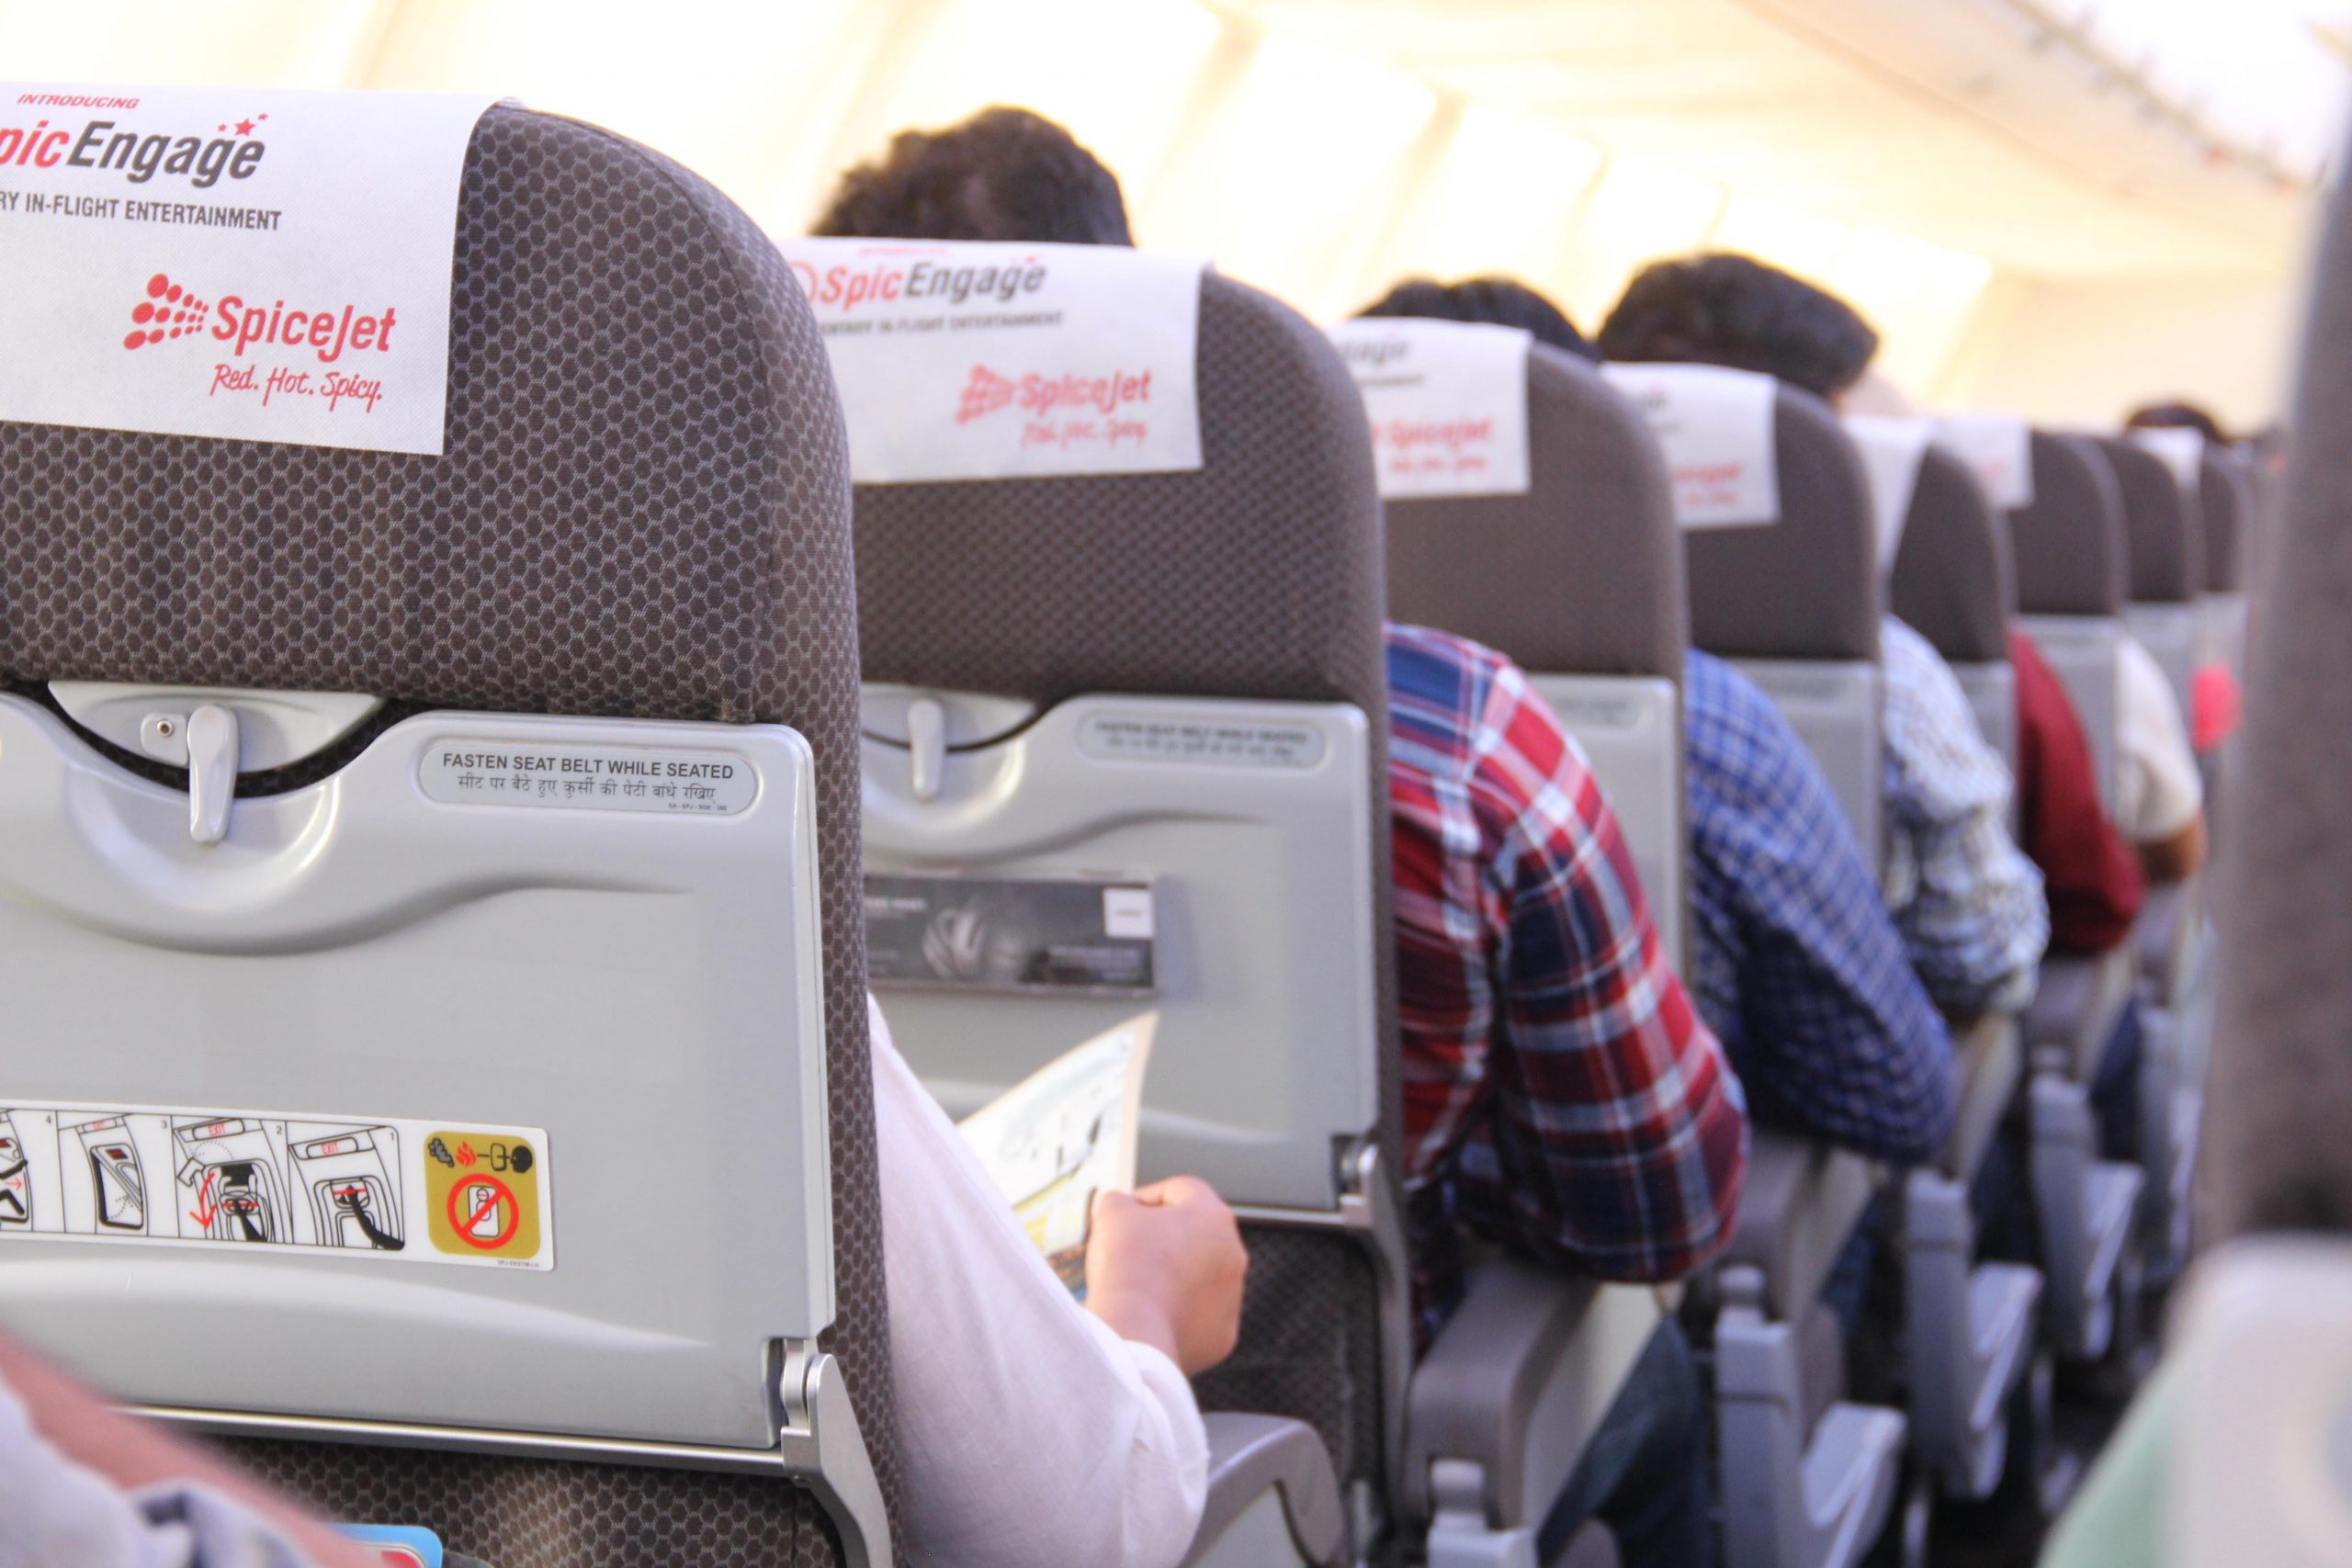 Passengers sat in a SpiceJet Airline